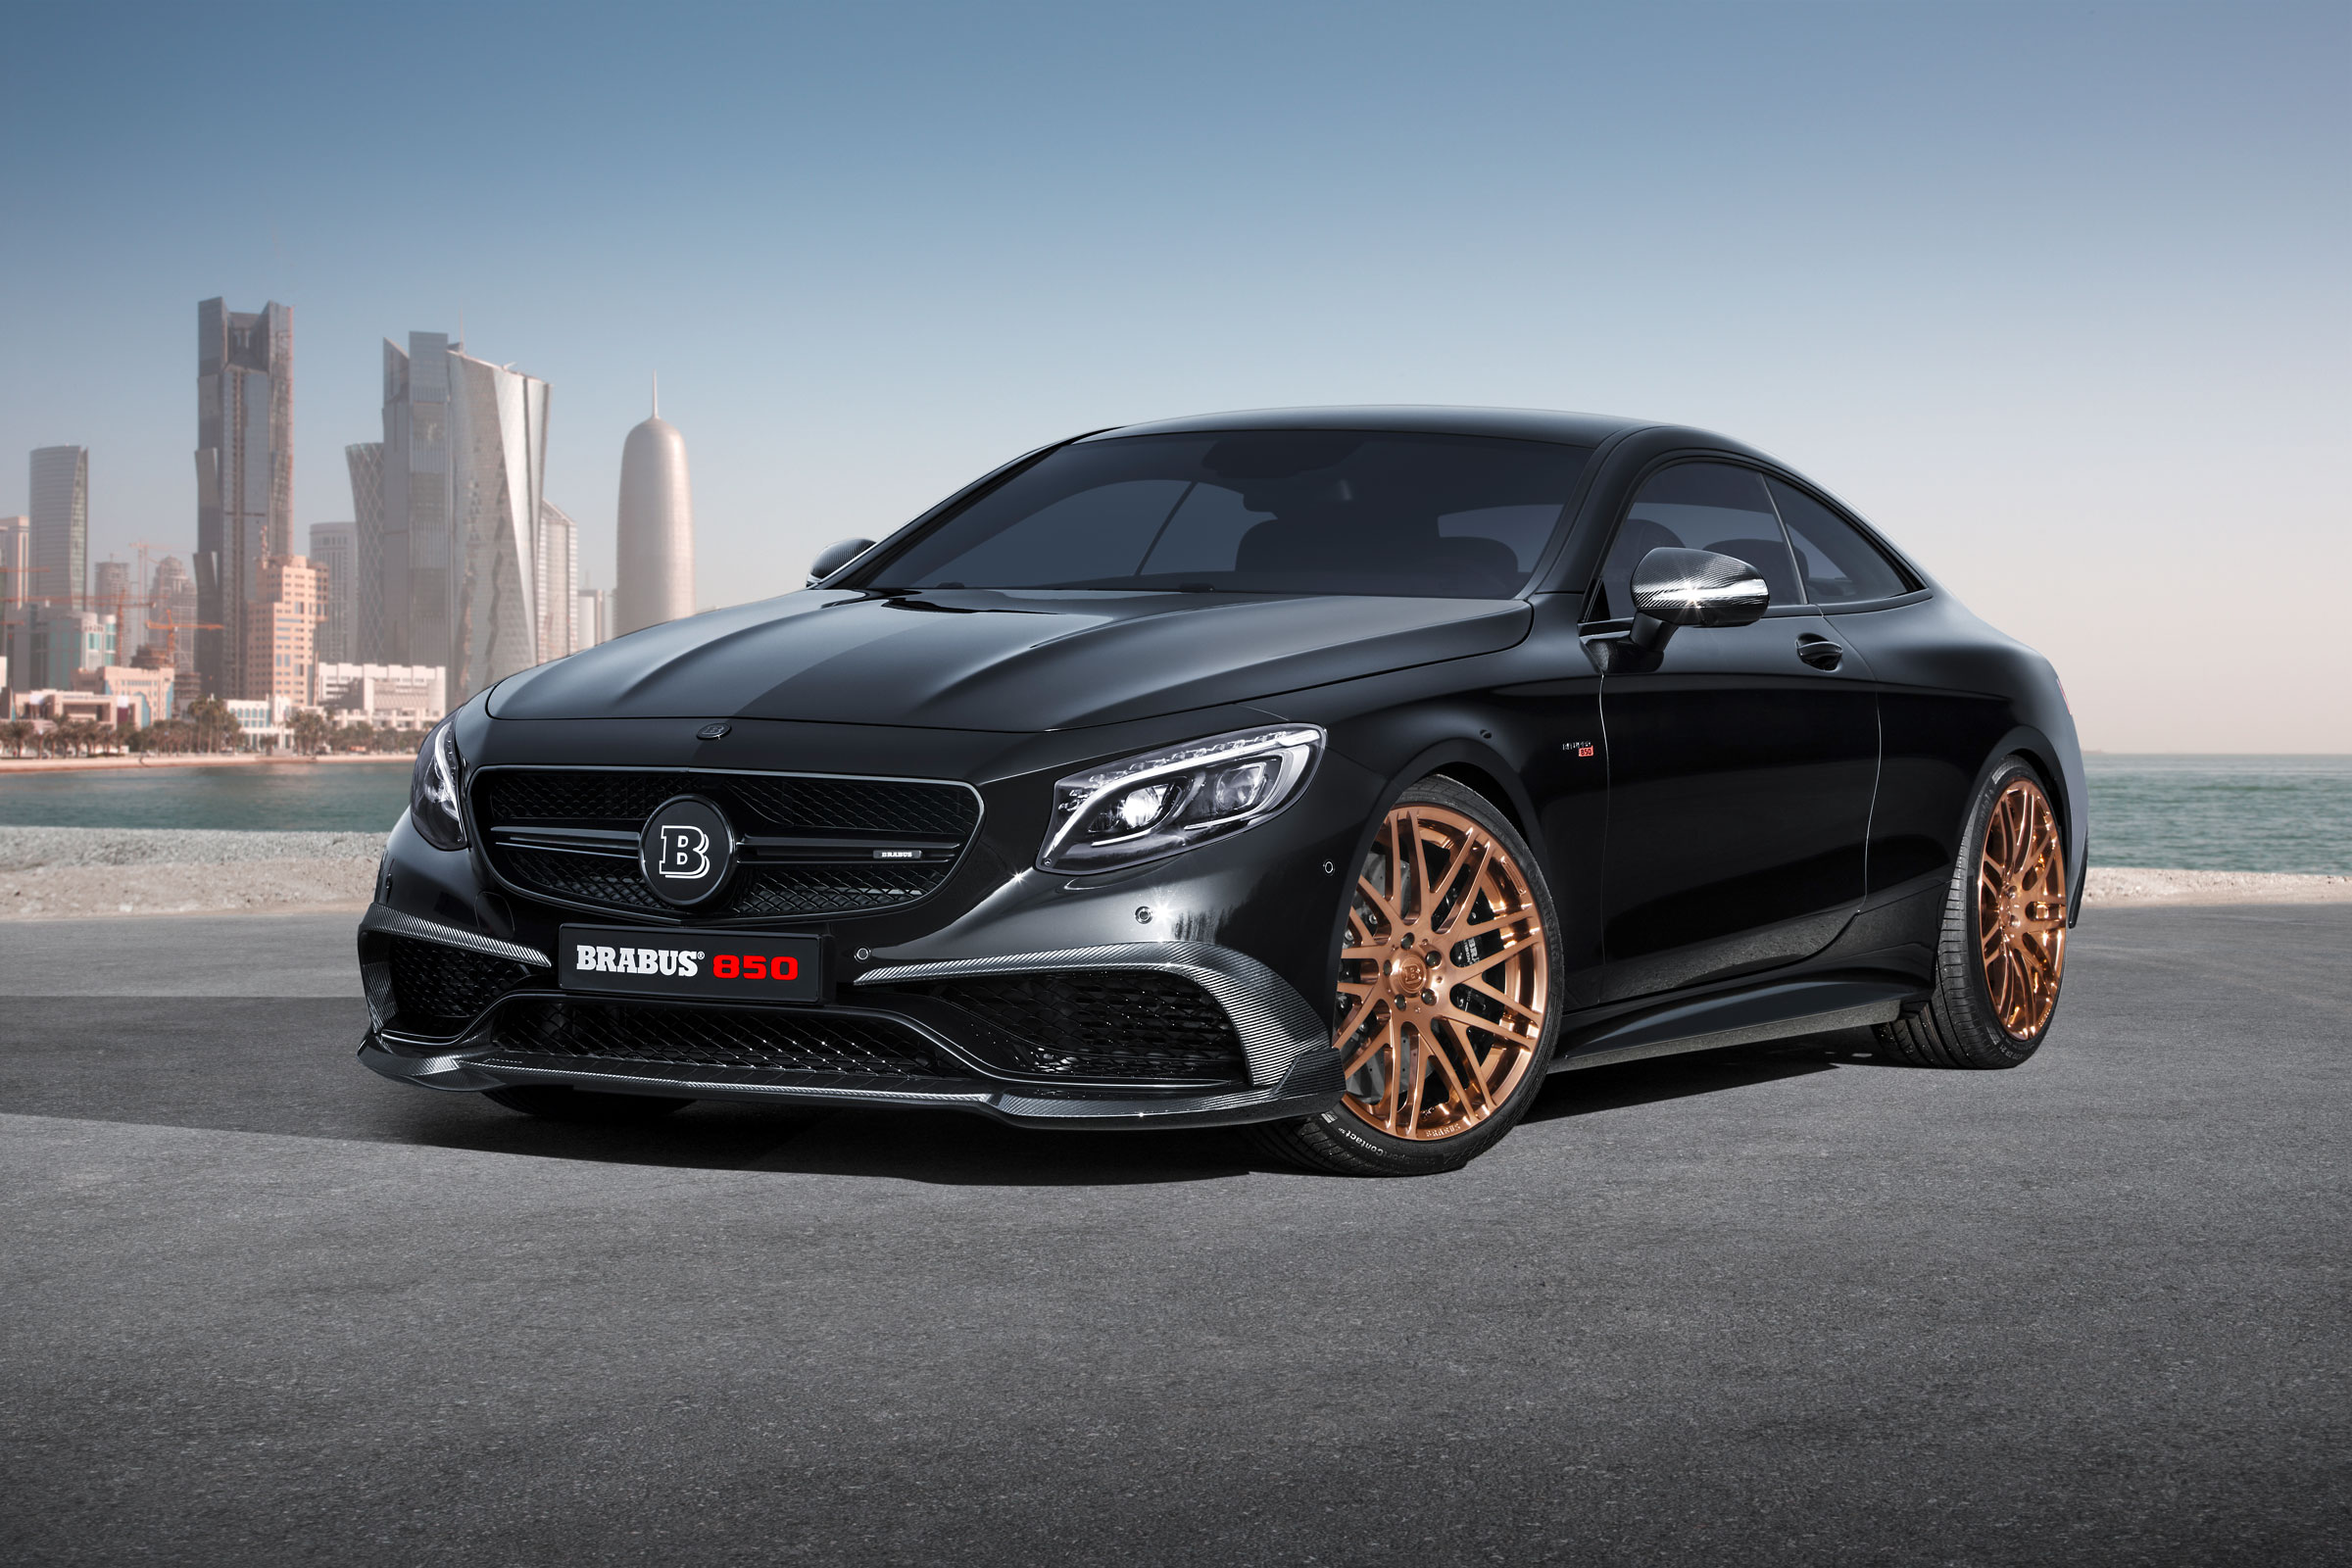 New Brabus S 63 850 Biturbo Coupe Is Limited To 217mph Auto Express